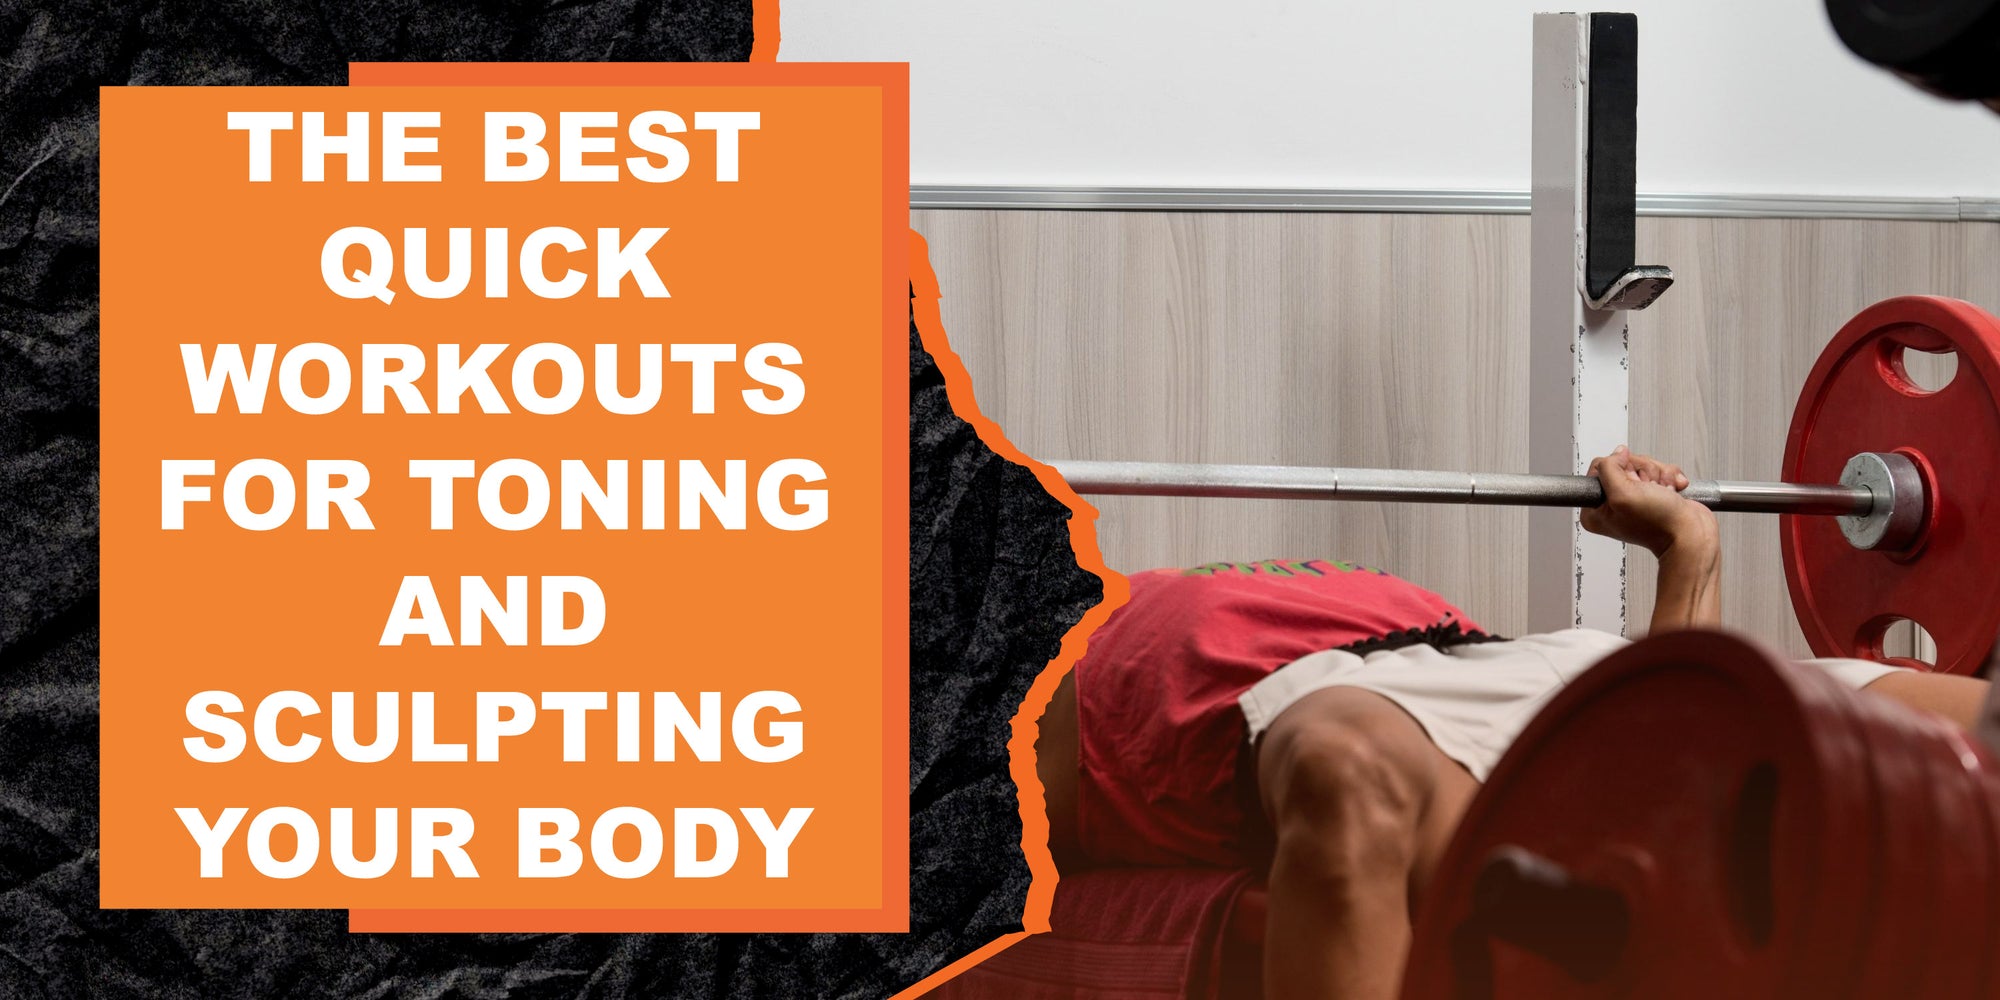 The Best Quick Workouts for Toning and Sculpting Your Body